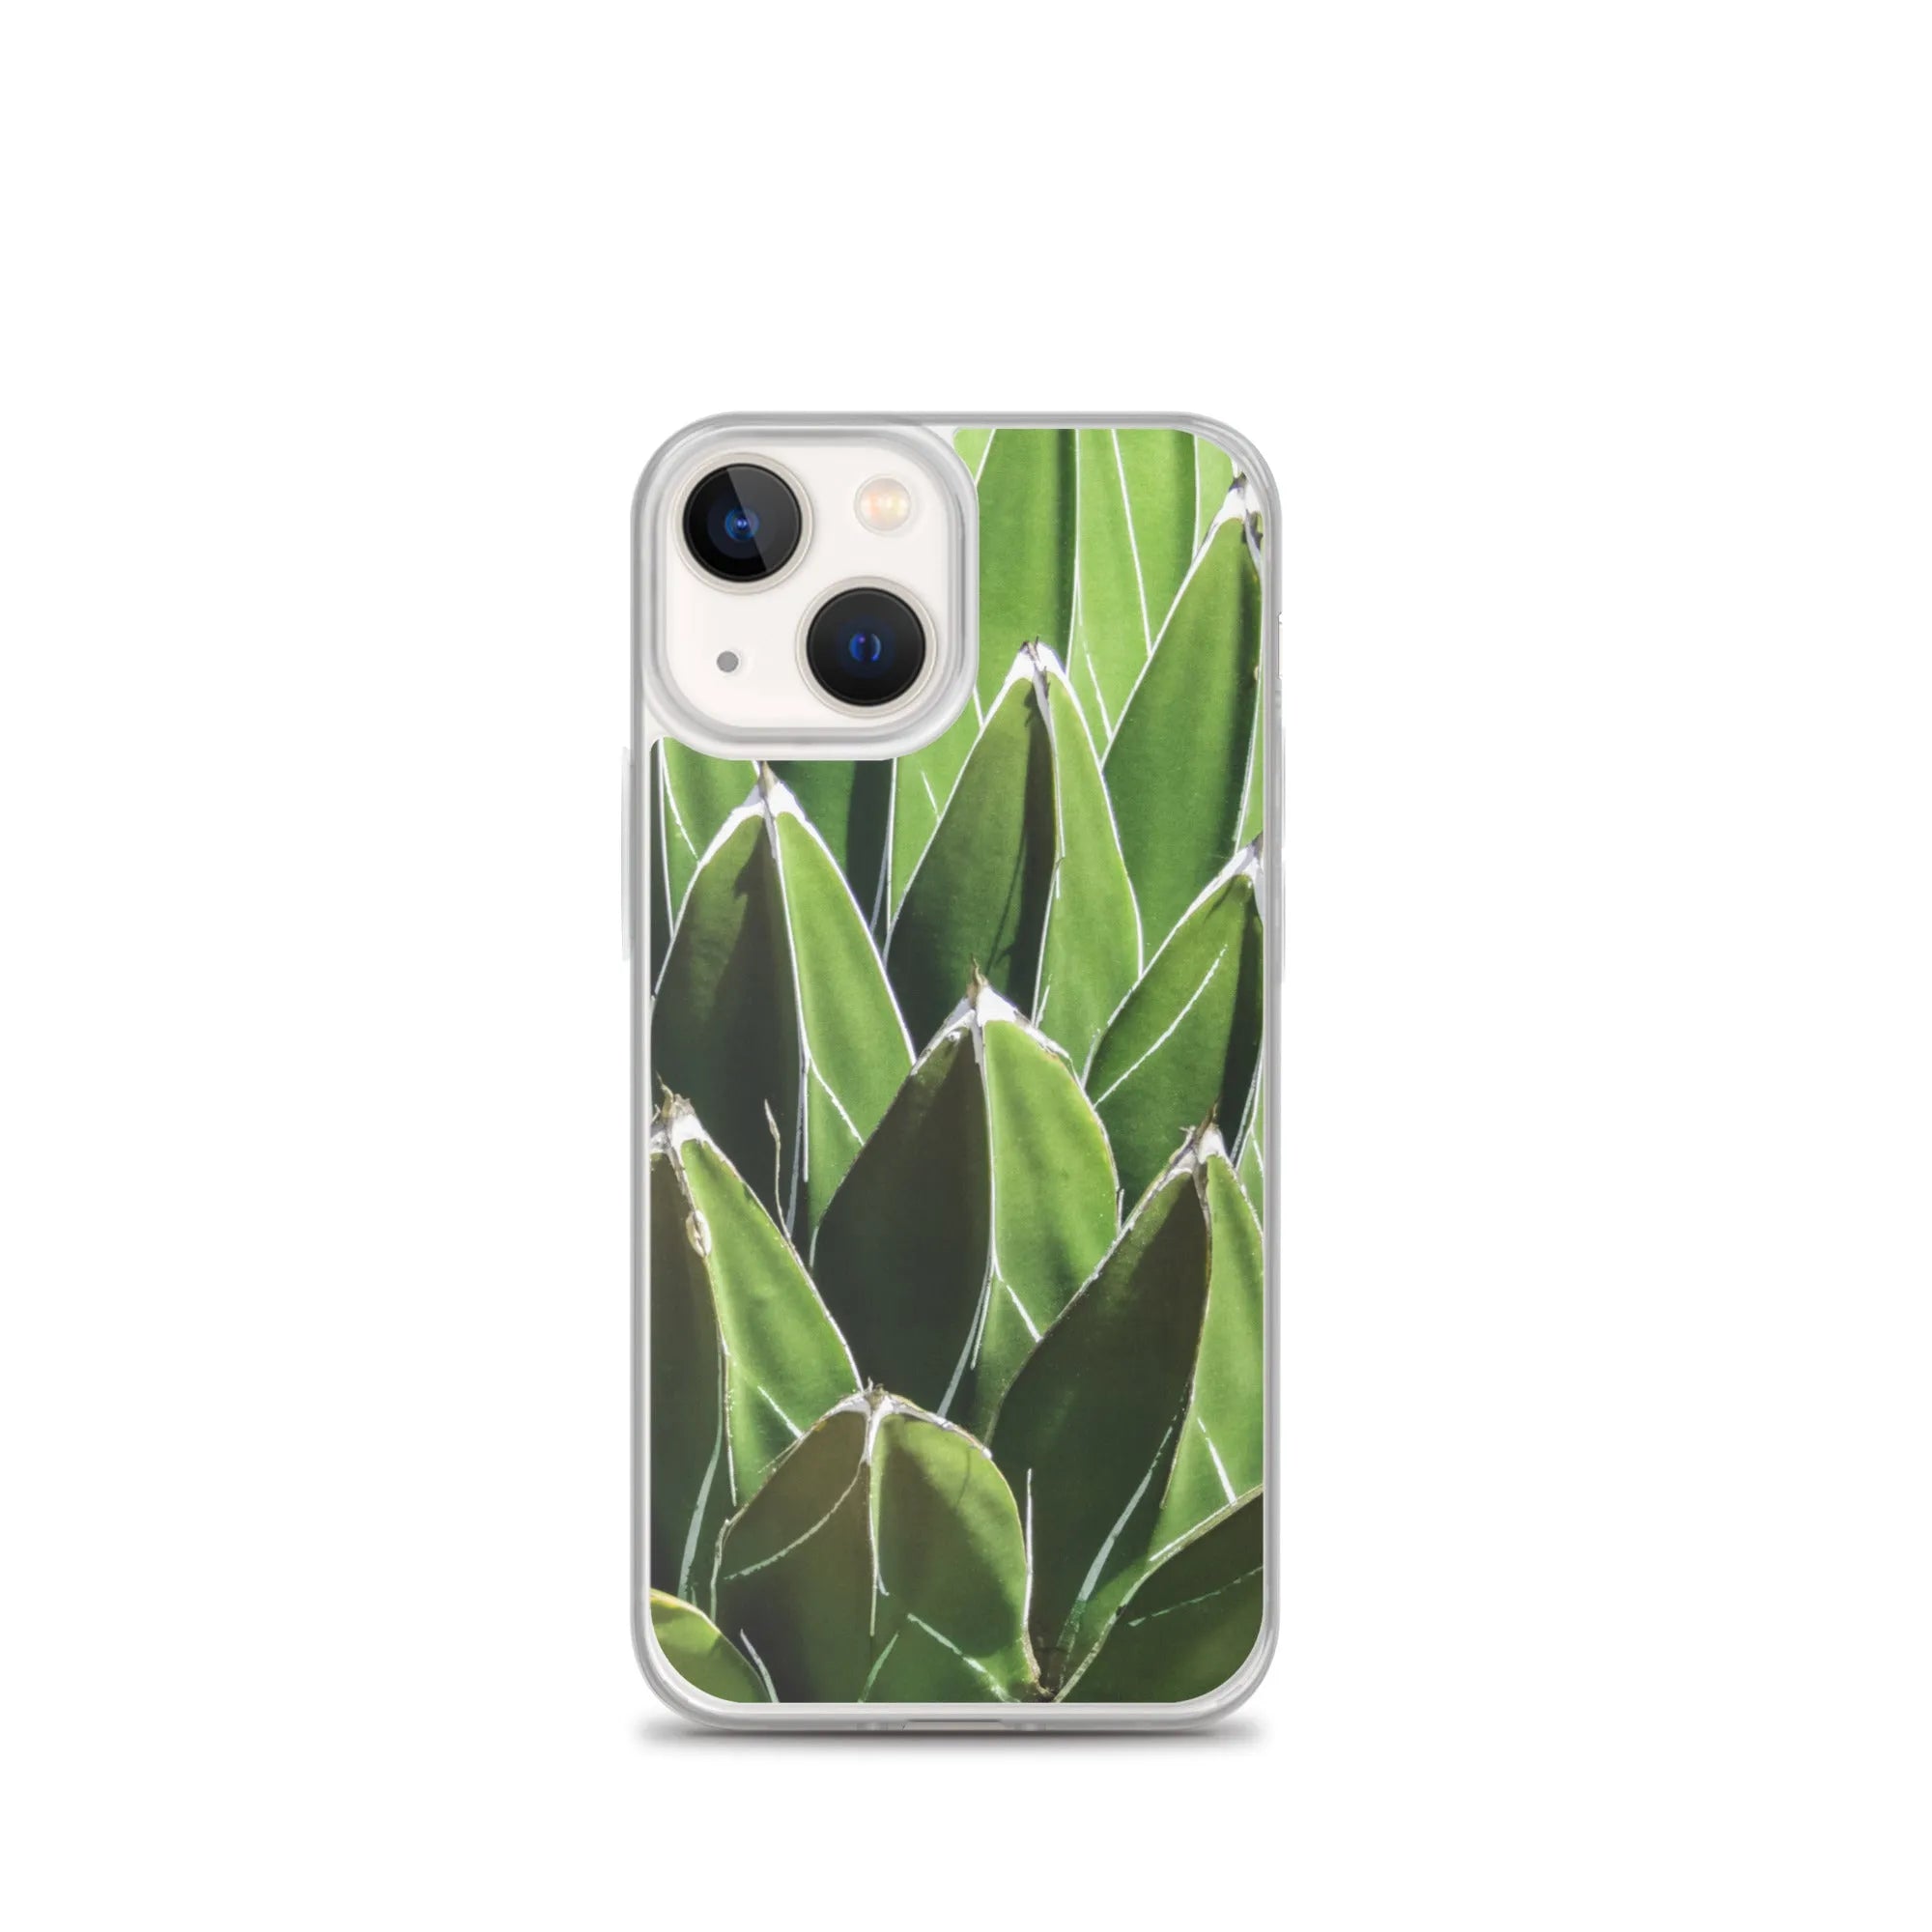 Decked Out Botanical Art Iphone Case - Iphone 13 Mini - Mobile Phone Cases - Aesthetic Art